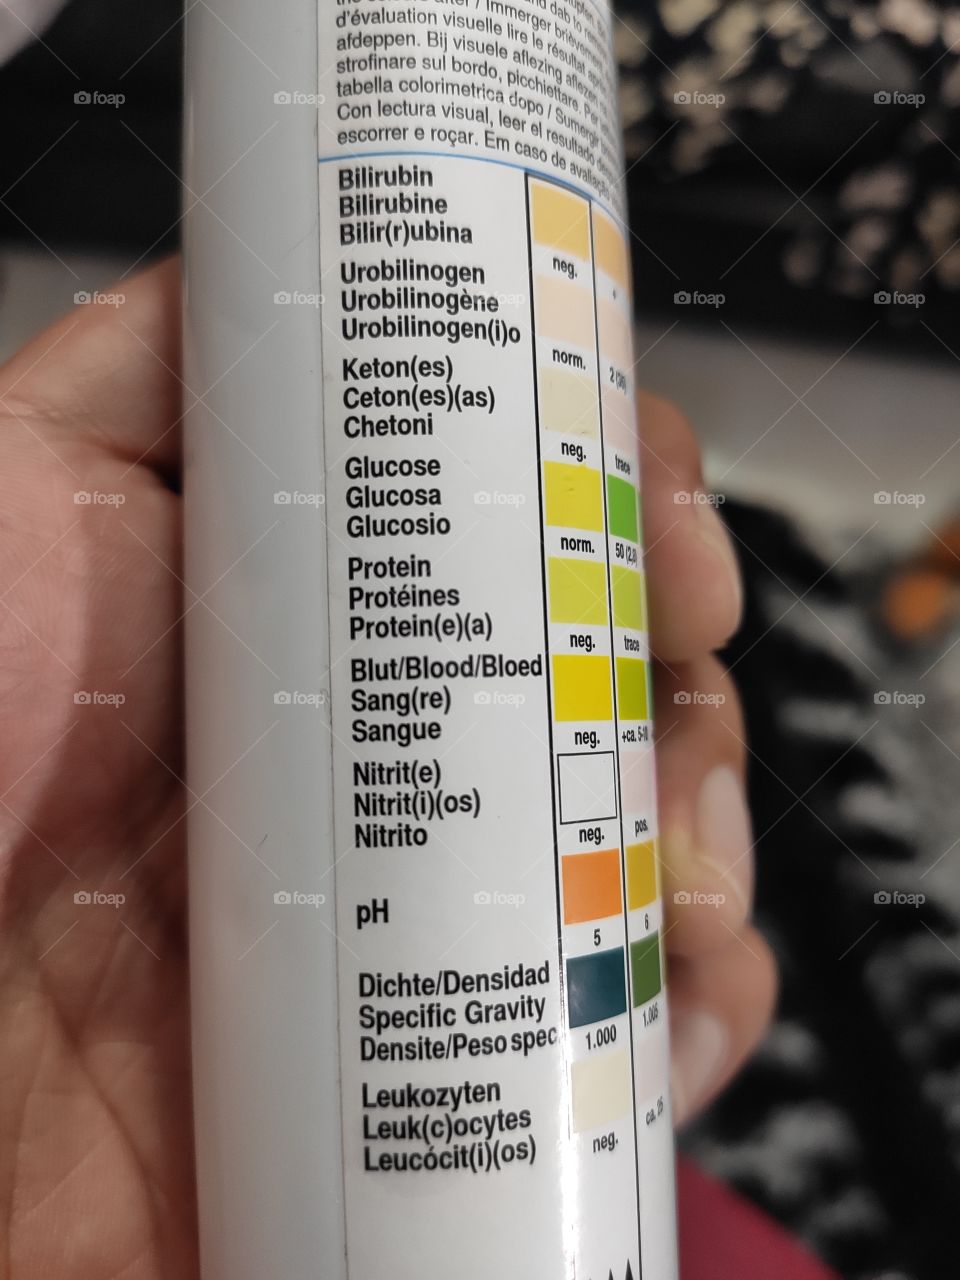 some urine test bars showing ketones and glucose and blood in your urine some protein is a test